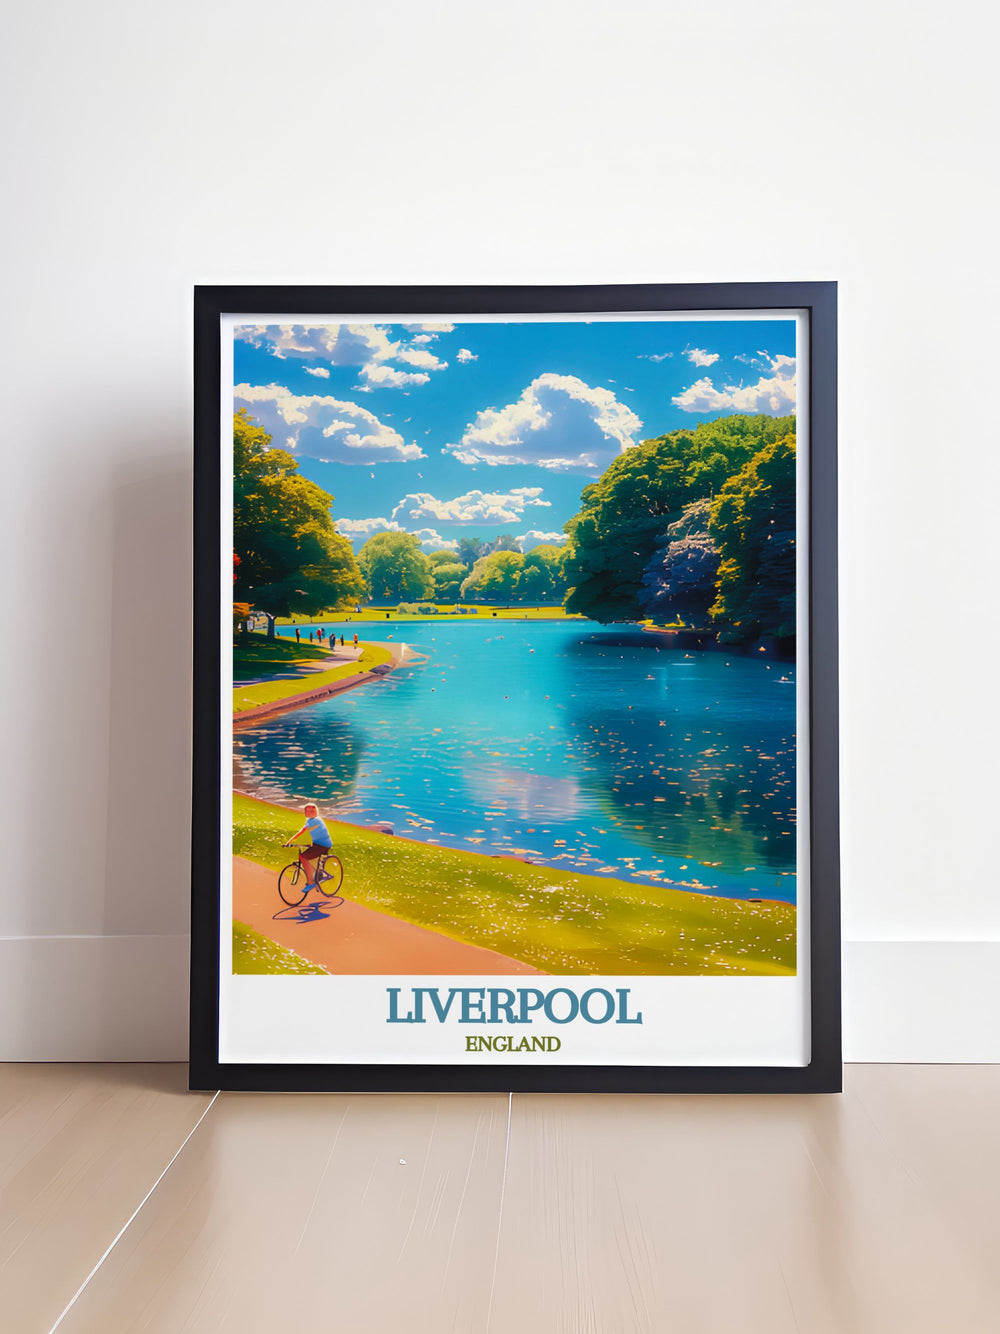 Transform your living space with the Cream Liverpool Poster a framed print capturing the spirit of Liverpools dynamic nightlife and electronic music scene ideal for modern interiors and Sefton Park elegant home decor